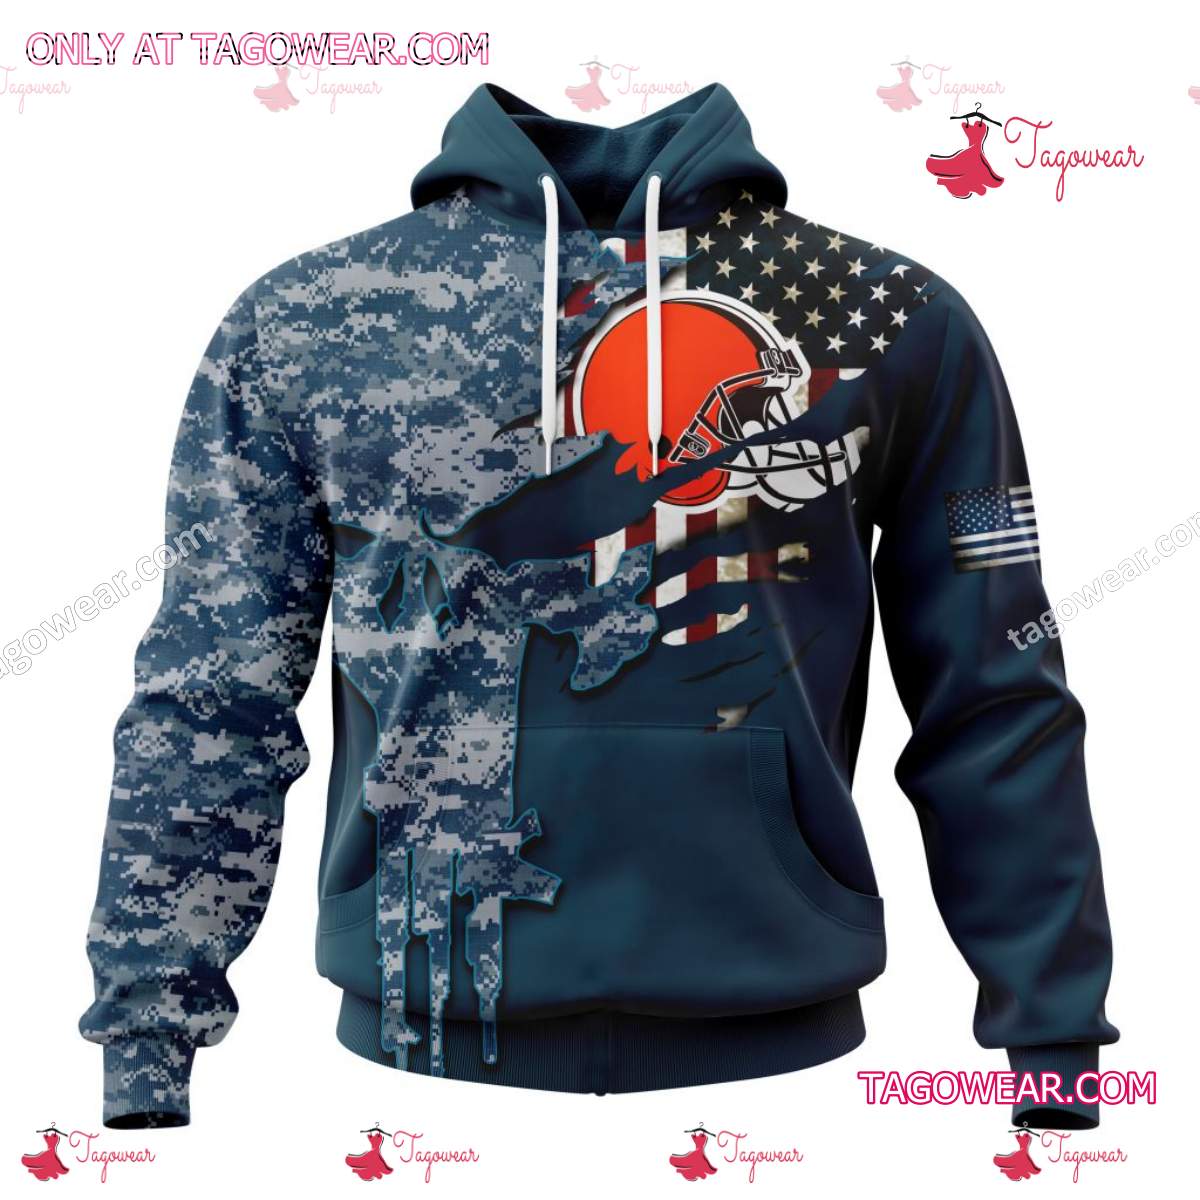 Cleveland Browns NFL America's Navy Camo Skull Personalized Apparels